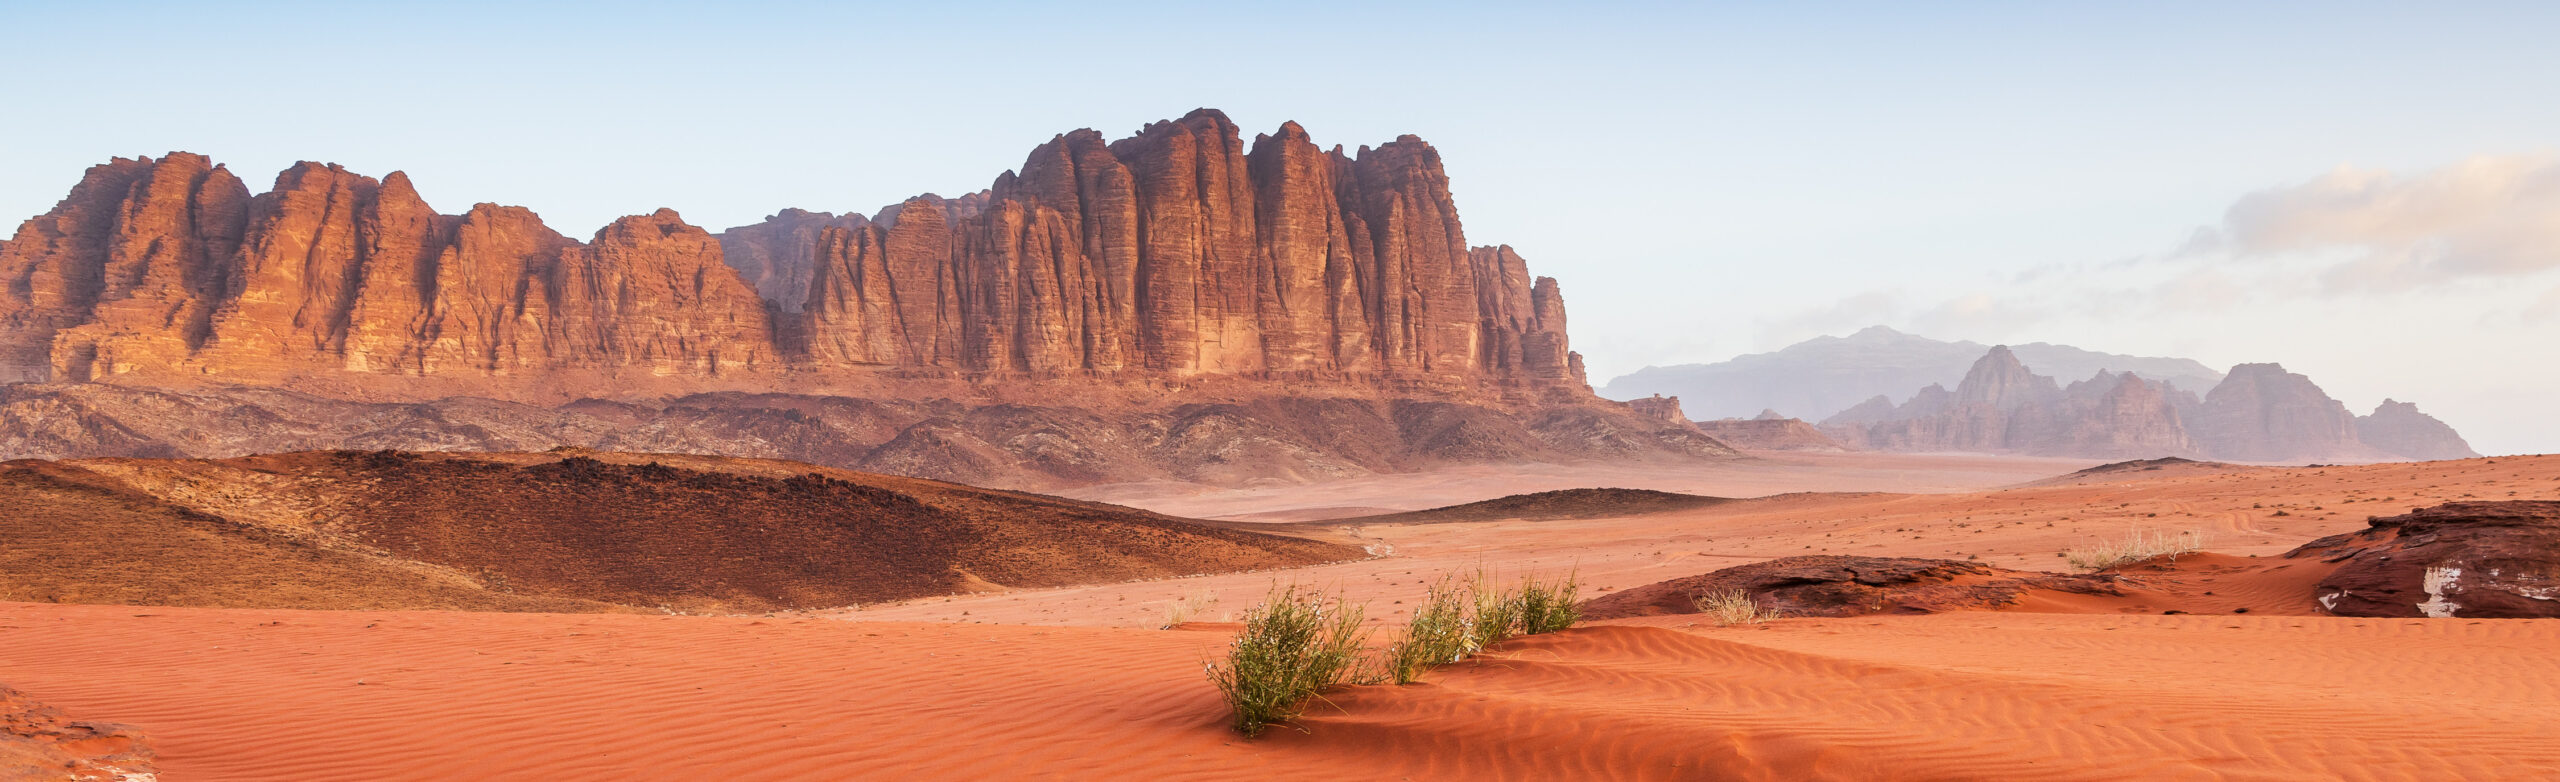 The Wadi Rum Desert - Orange Sands and Large Rock Formations